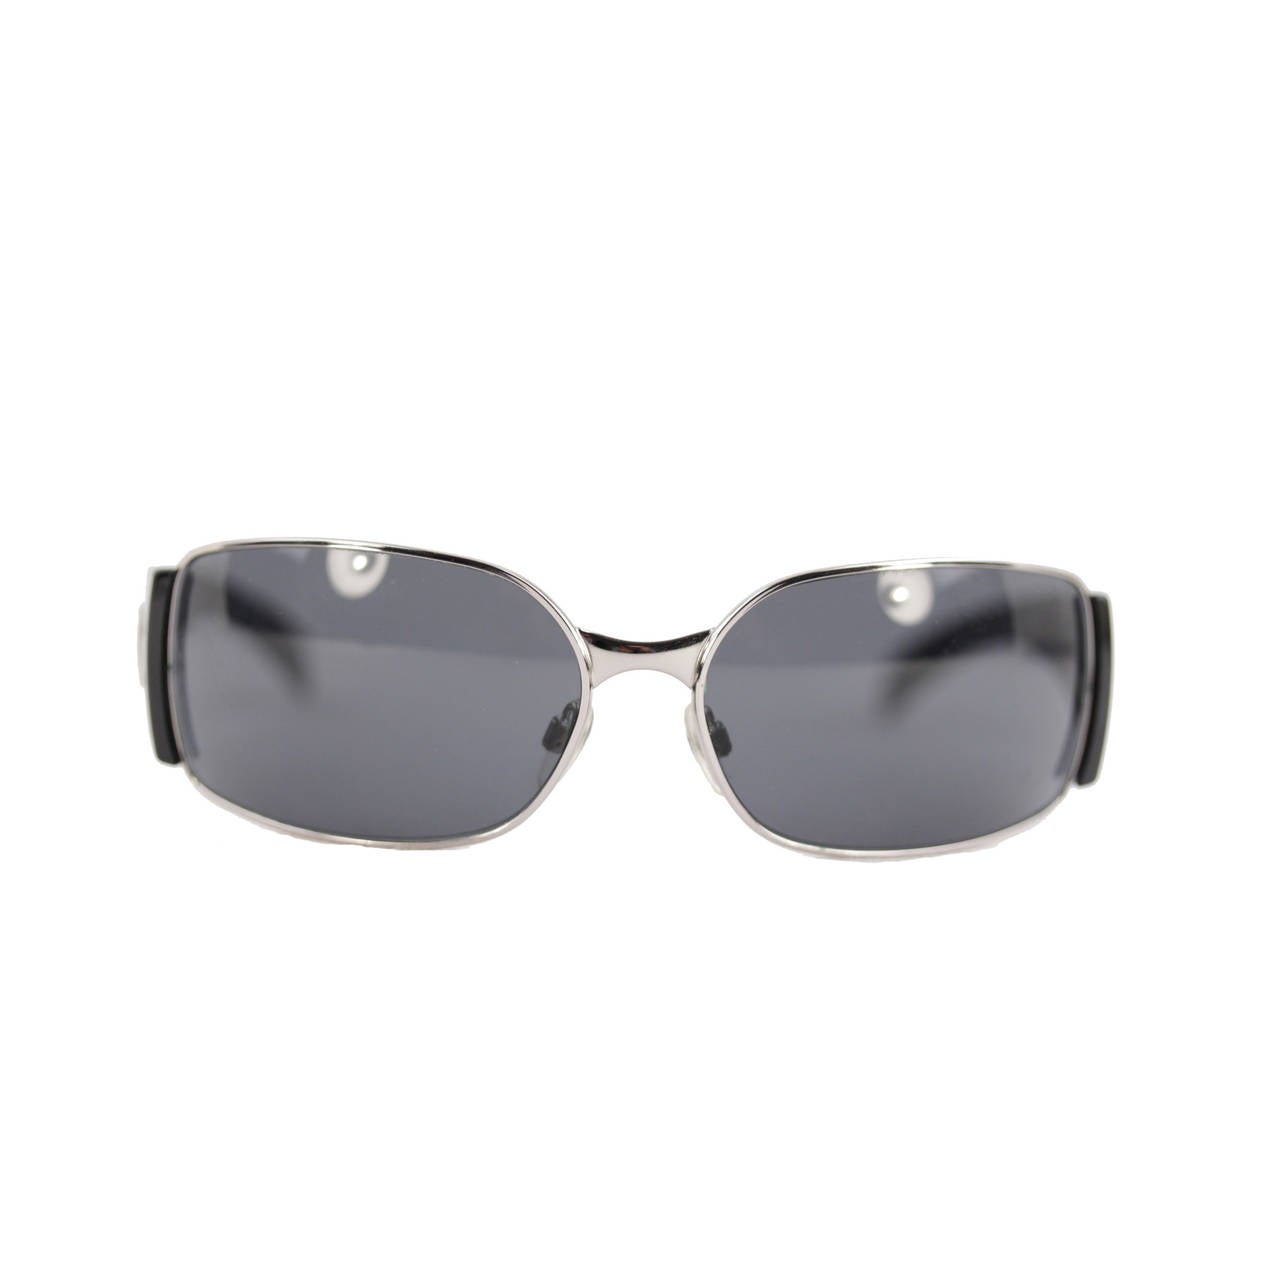 CHANEL SUNGLASSES Black and Silver Metal 4115 c.127/87 Shades